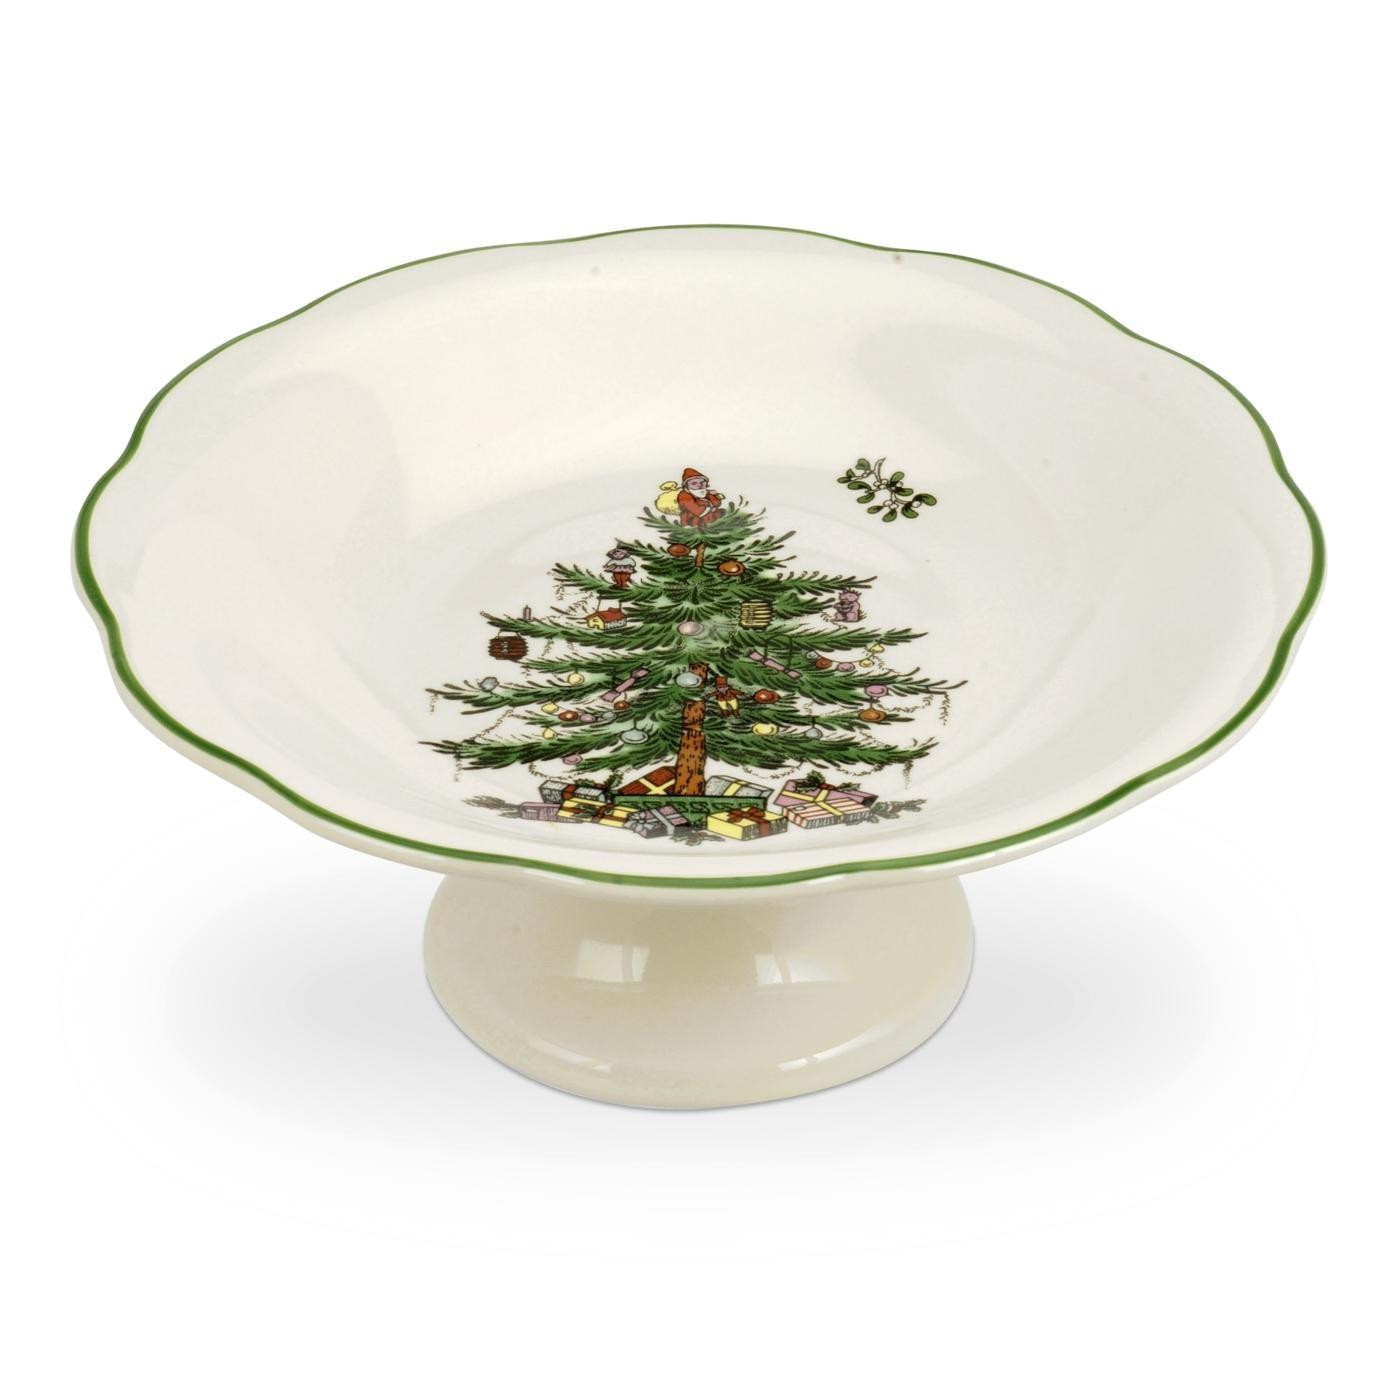 Christmas Tree Candy Dish
 Spode Christmas Tree Sculpted Footed Candy Dish Spode UK